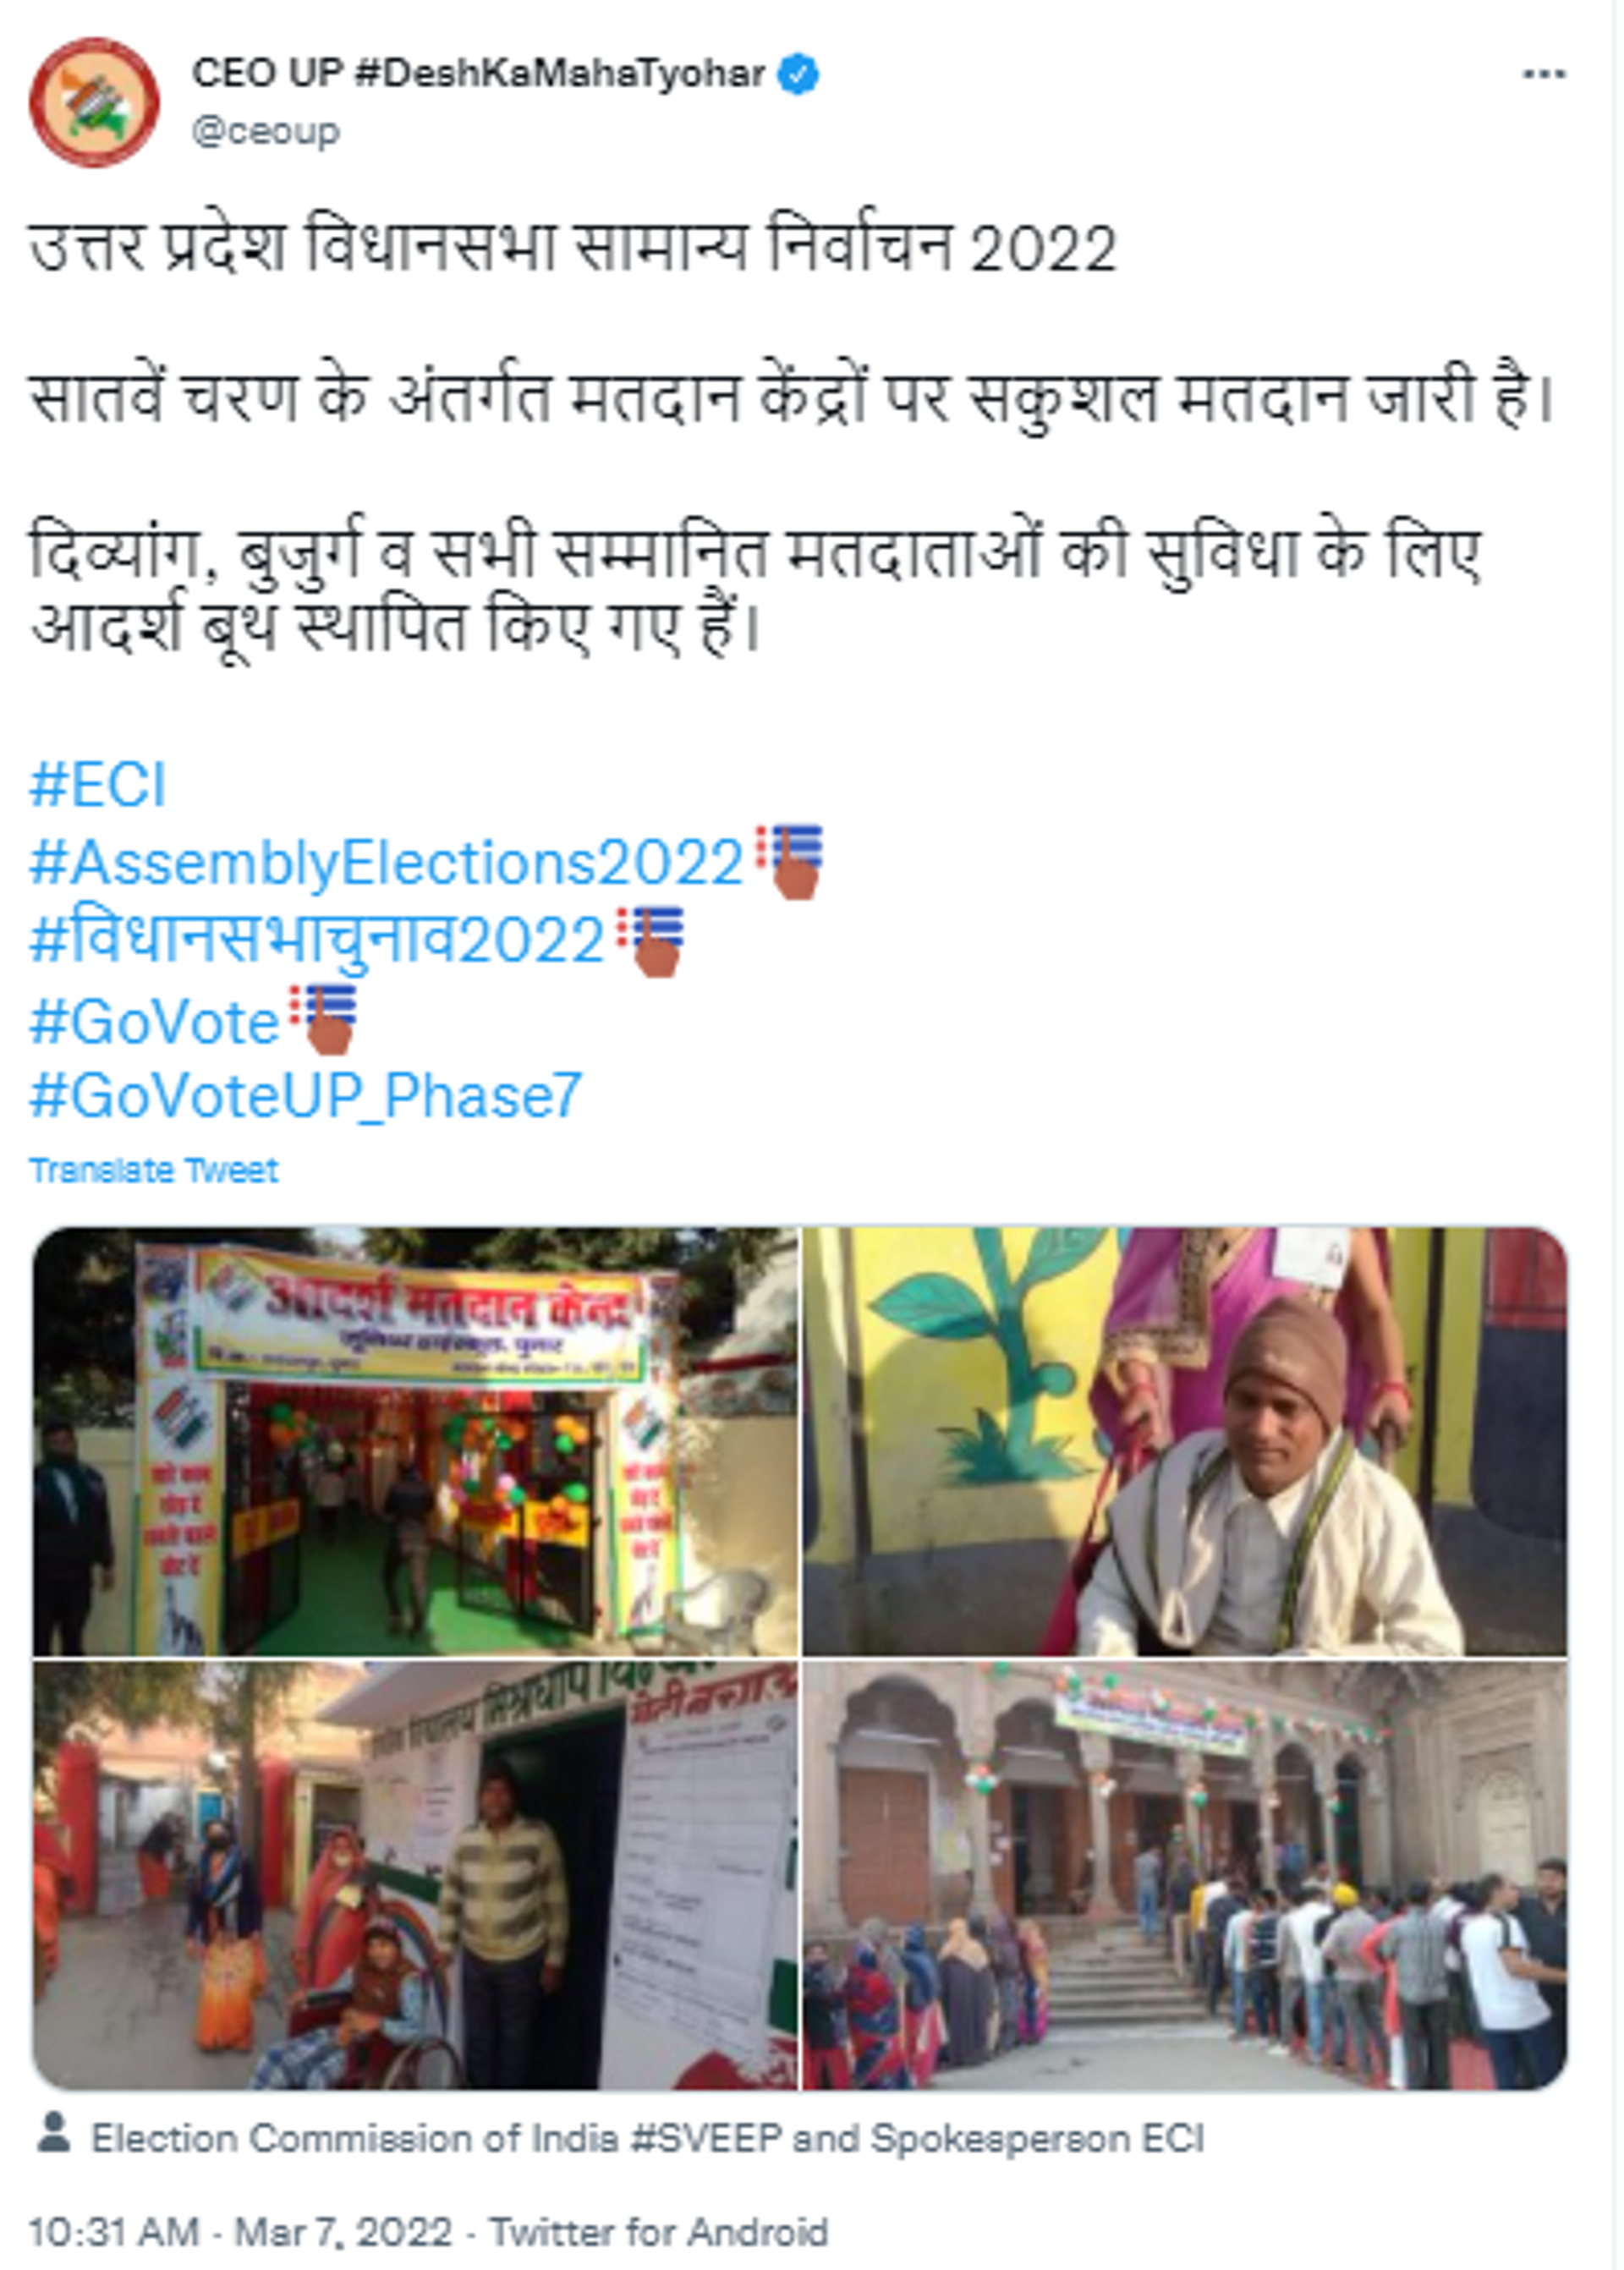 Office of Uttar Pradesh Chief Electoral Officer Assures of Smooth Voting at all Polling Stations - Sputnik International, 1920, 07.03.2022